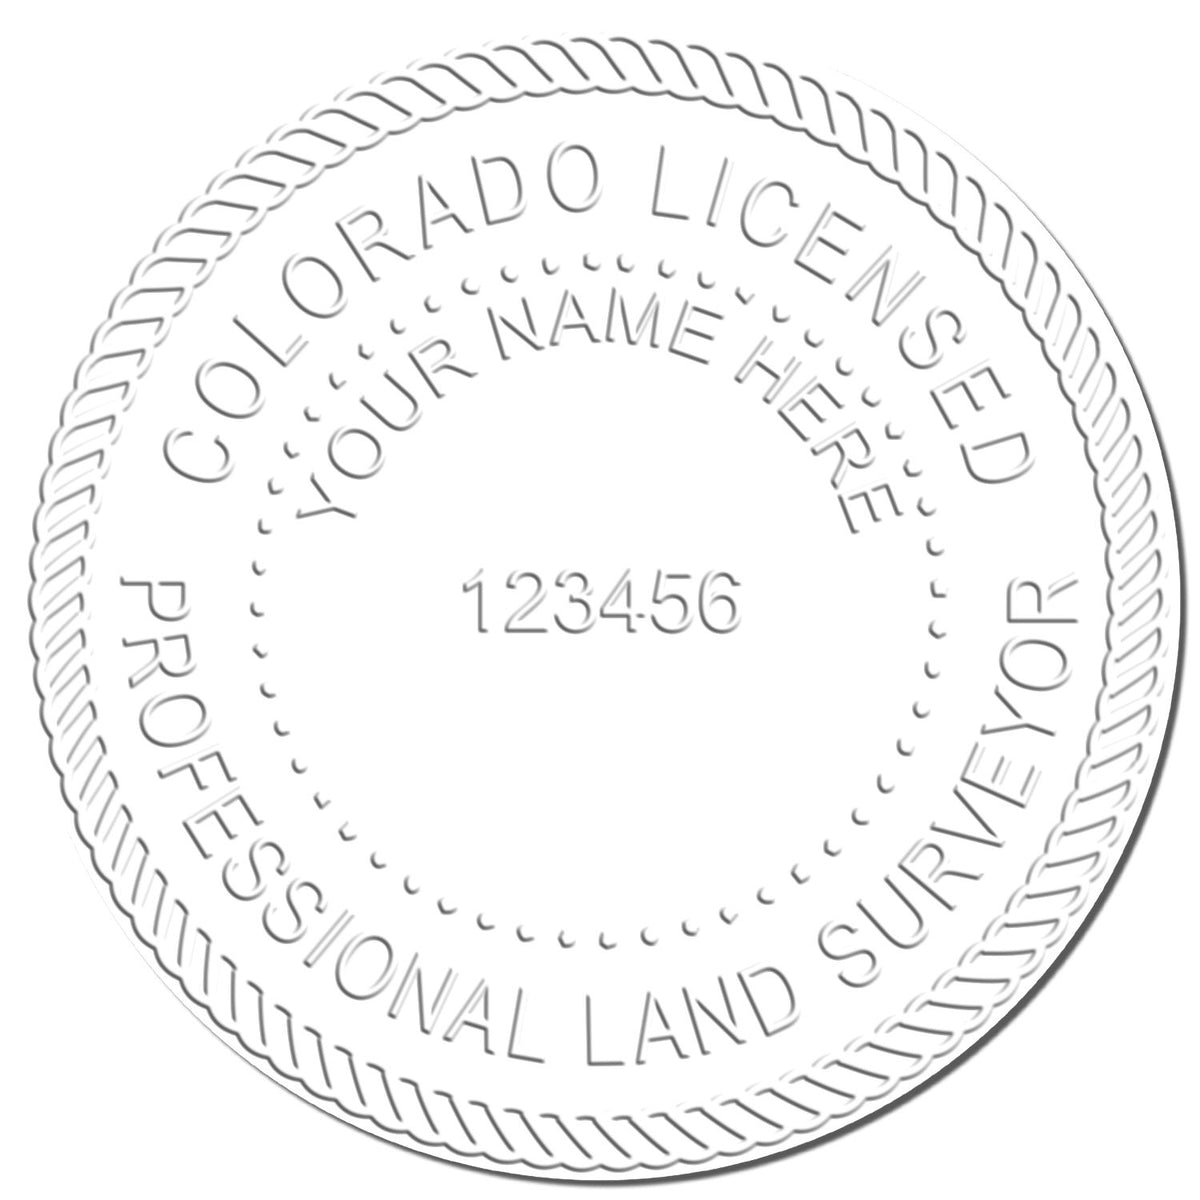 This paper is stamped with a sample imprint of the State of Colorado Soft Land Surveyor Embossing Seal, signifying its quality and reliability.